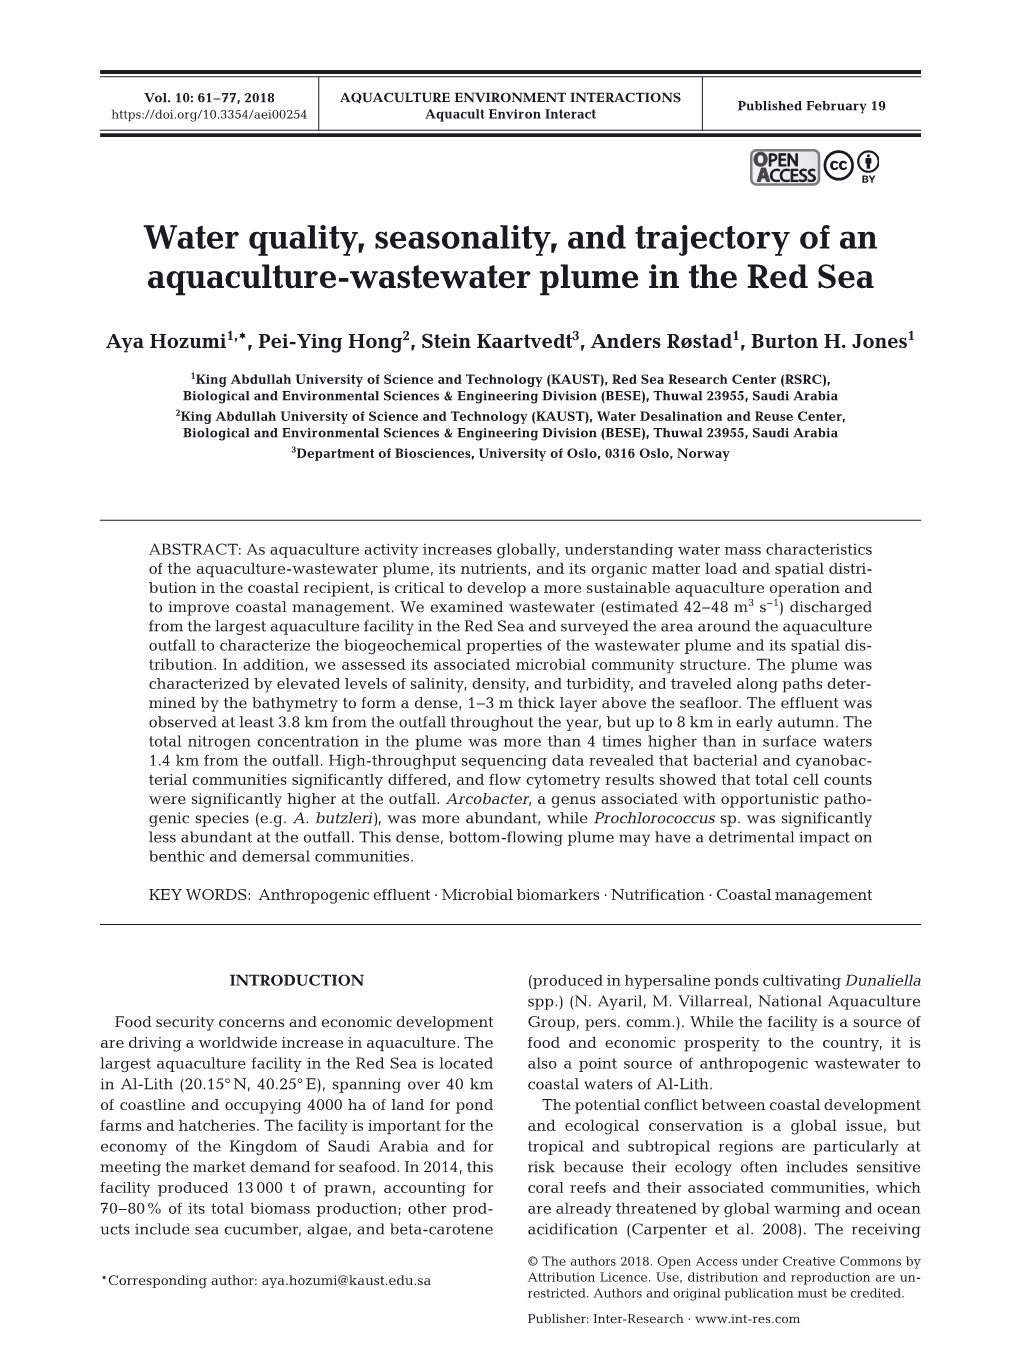 Water Quality, Seasonality, and Trajectory of an Aquaculture-Wastewater Plume in the Red Sea